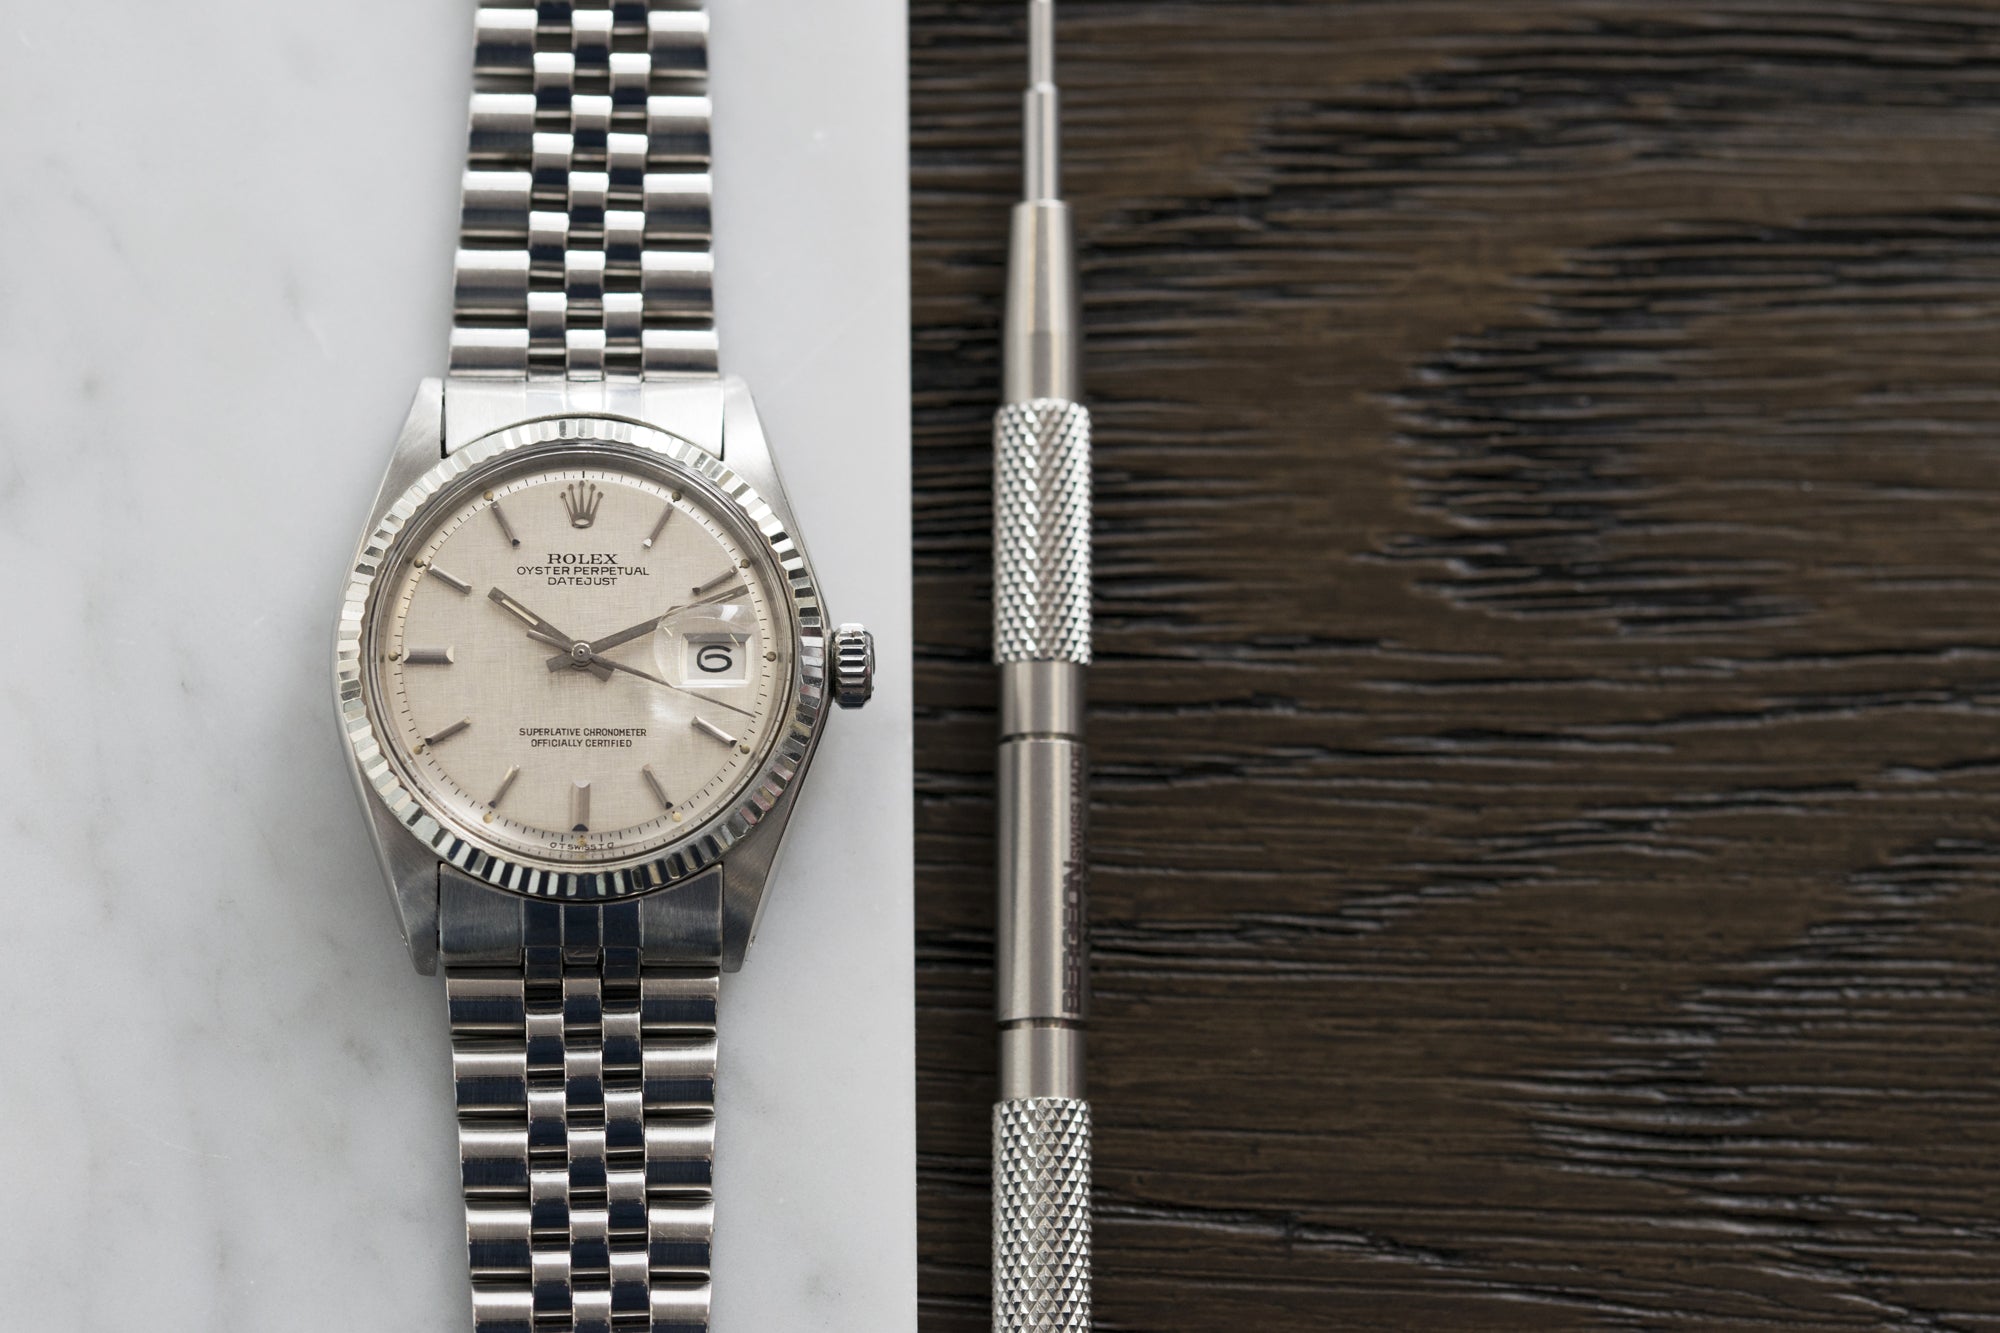 Rolex Datejust 1601 linen dial Oyster Perpetual vintage automatic steel sport dress watch for sale online at A Collected Man London UK specialist rare vintage watches